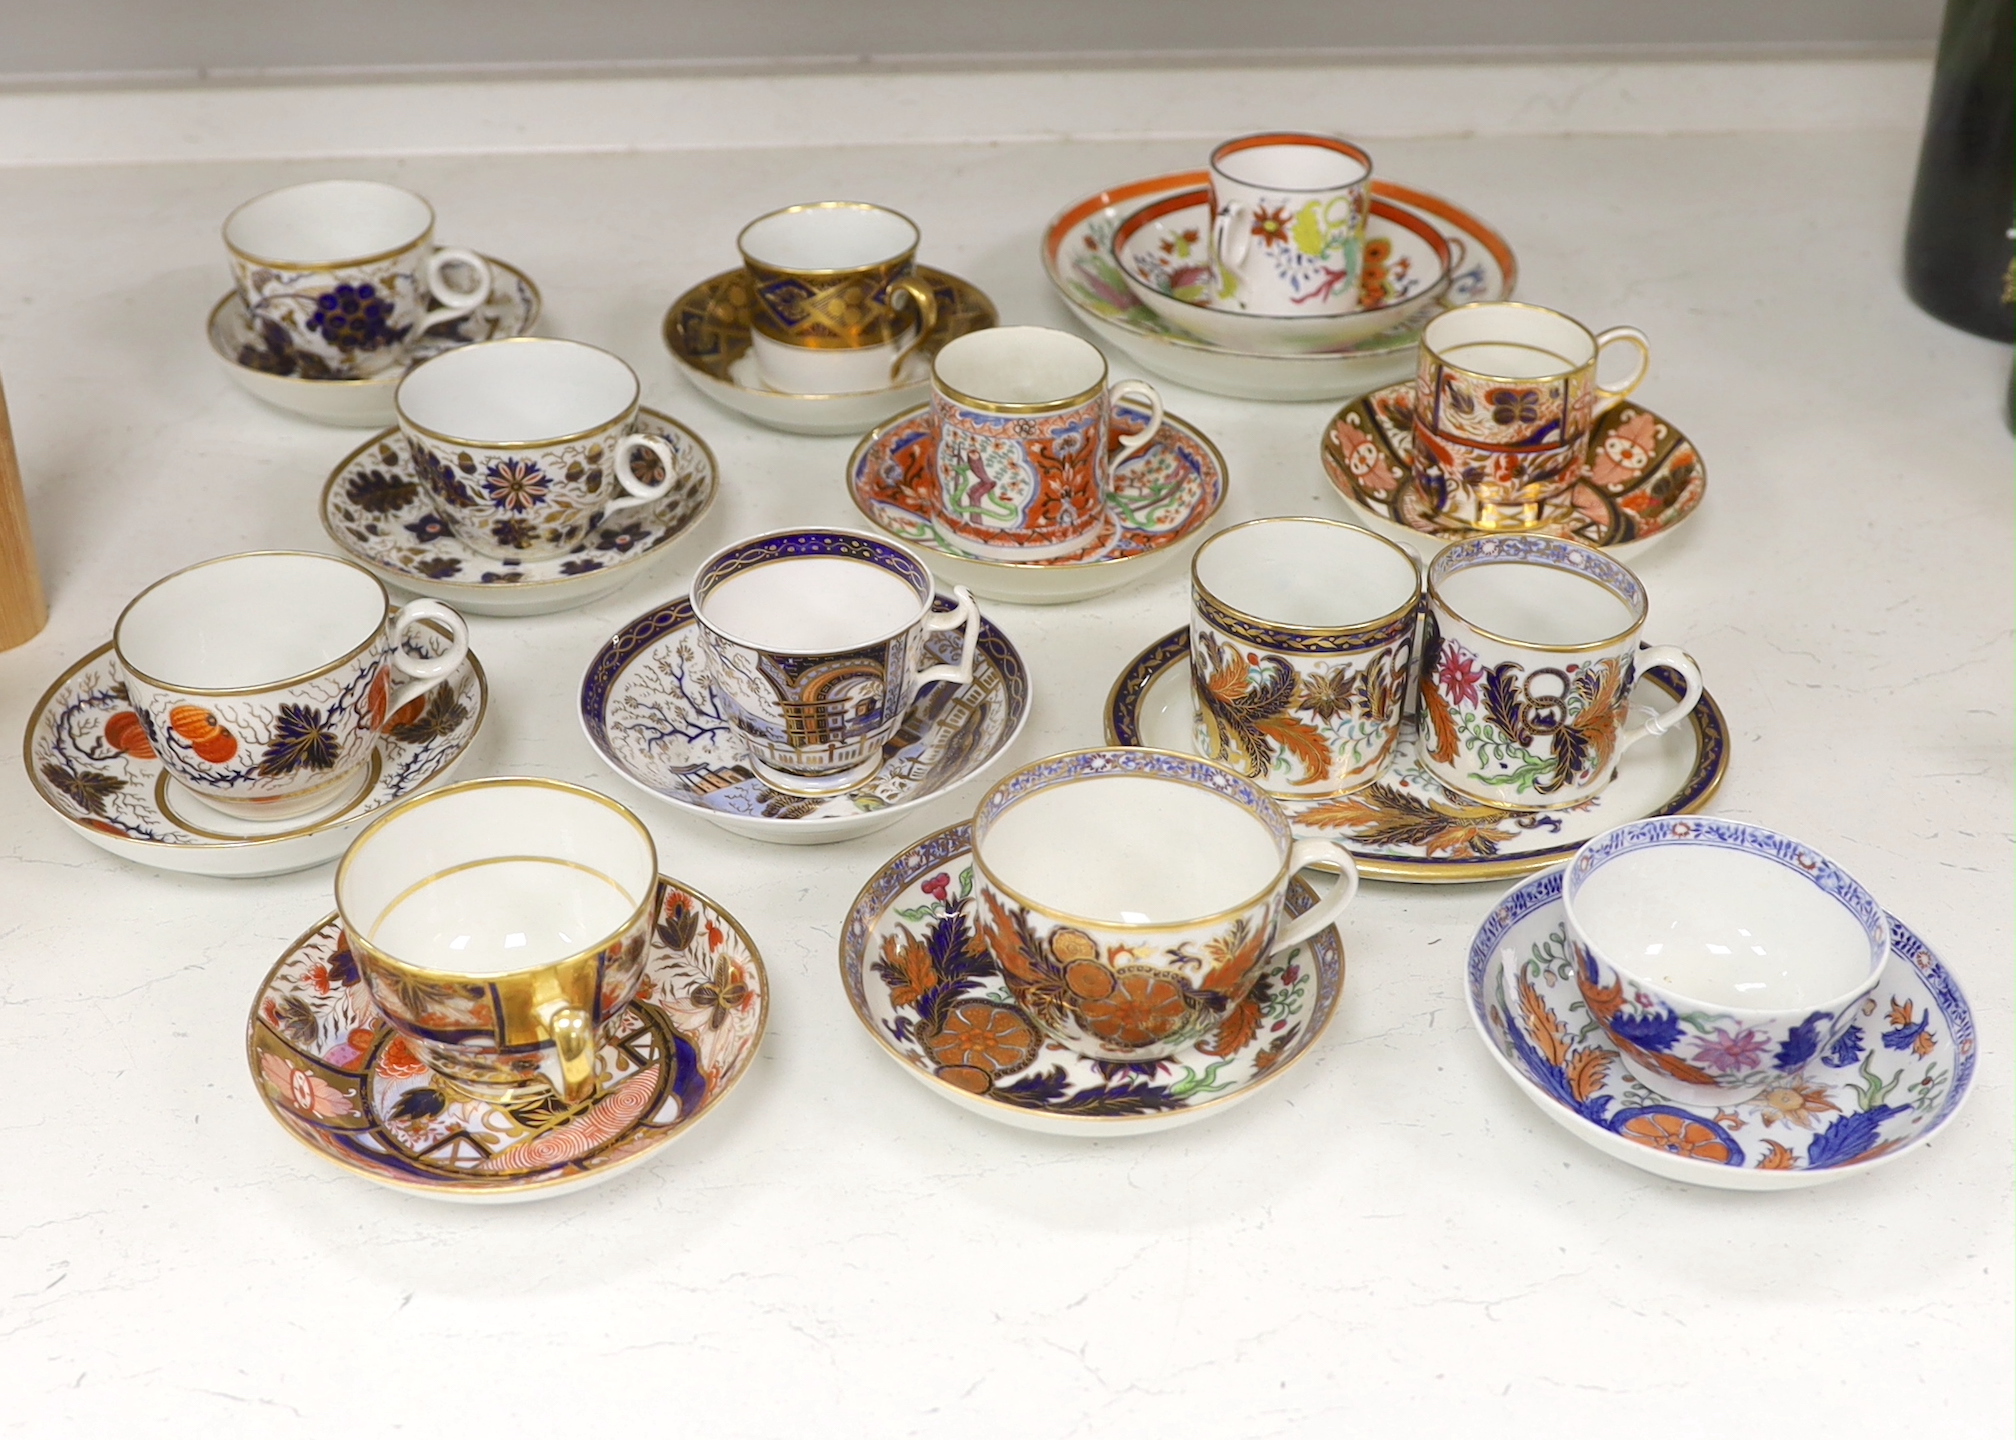 Six mixed English 1800-1820 porcelain cabinet cups and saucers, three similar coffee cans and saucers, a matching spoon stand and two coffee cans, a saucer dish, coffee can plus saucer and a tea bowl and matching saucer